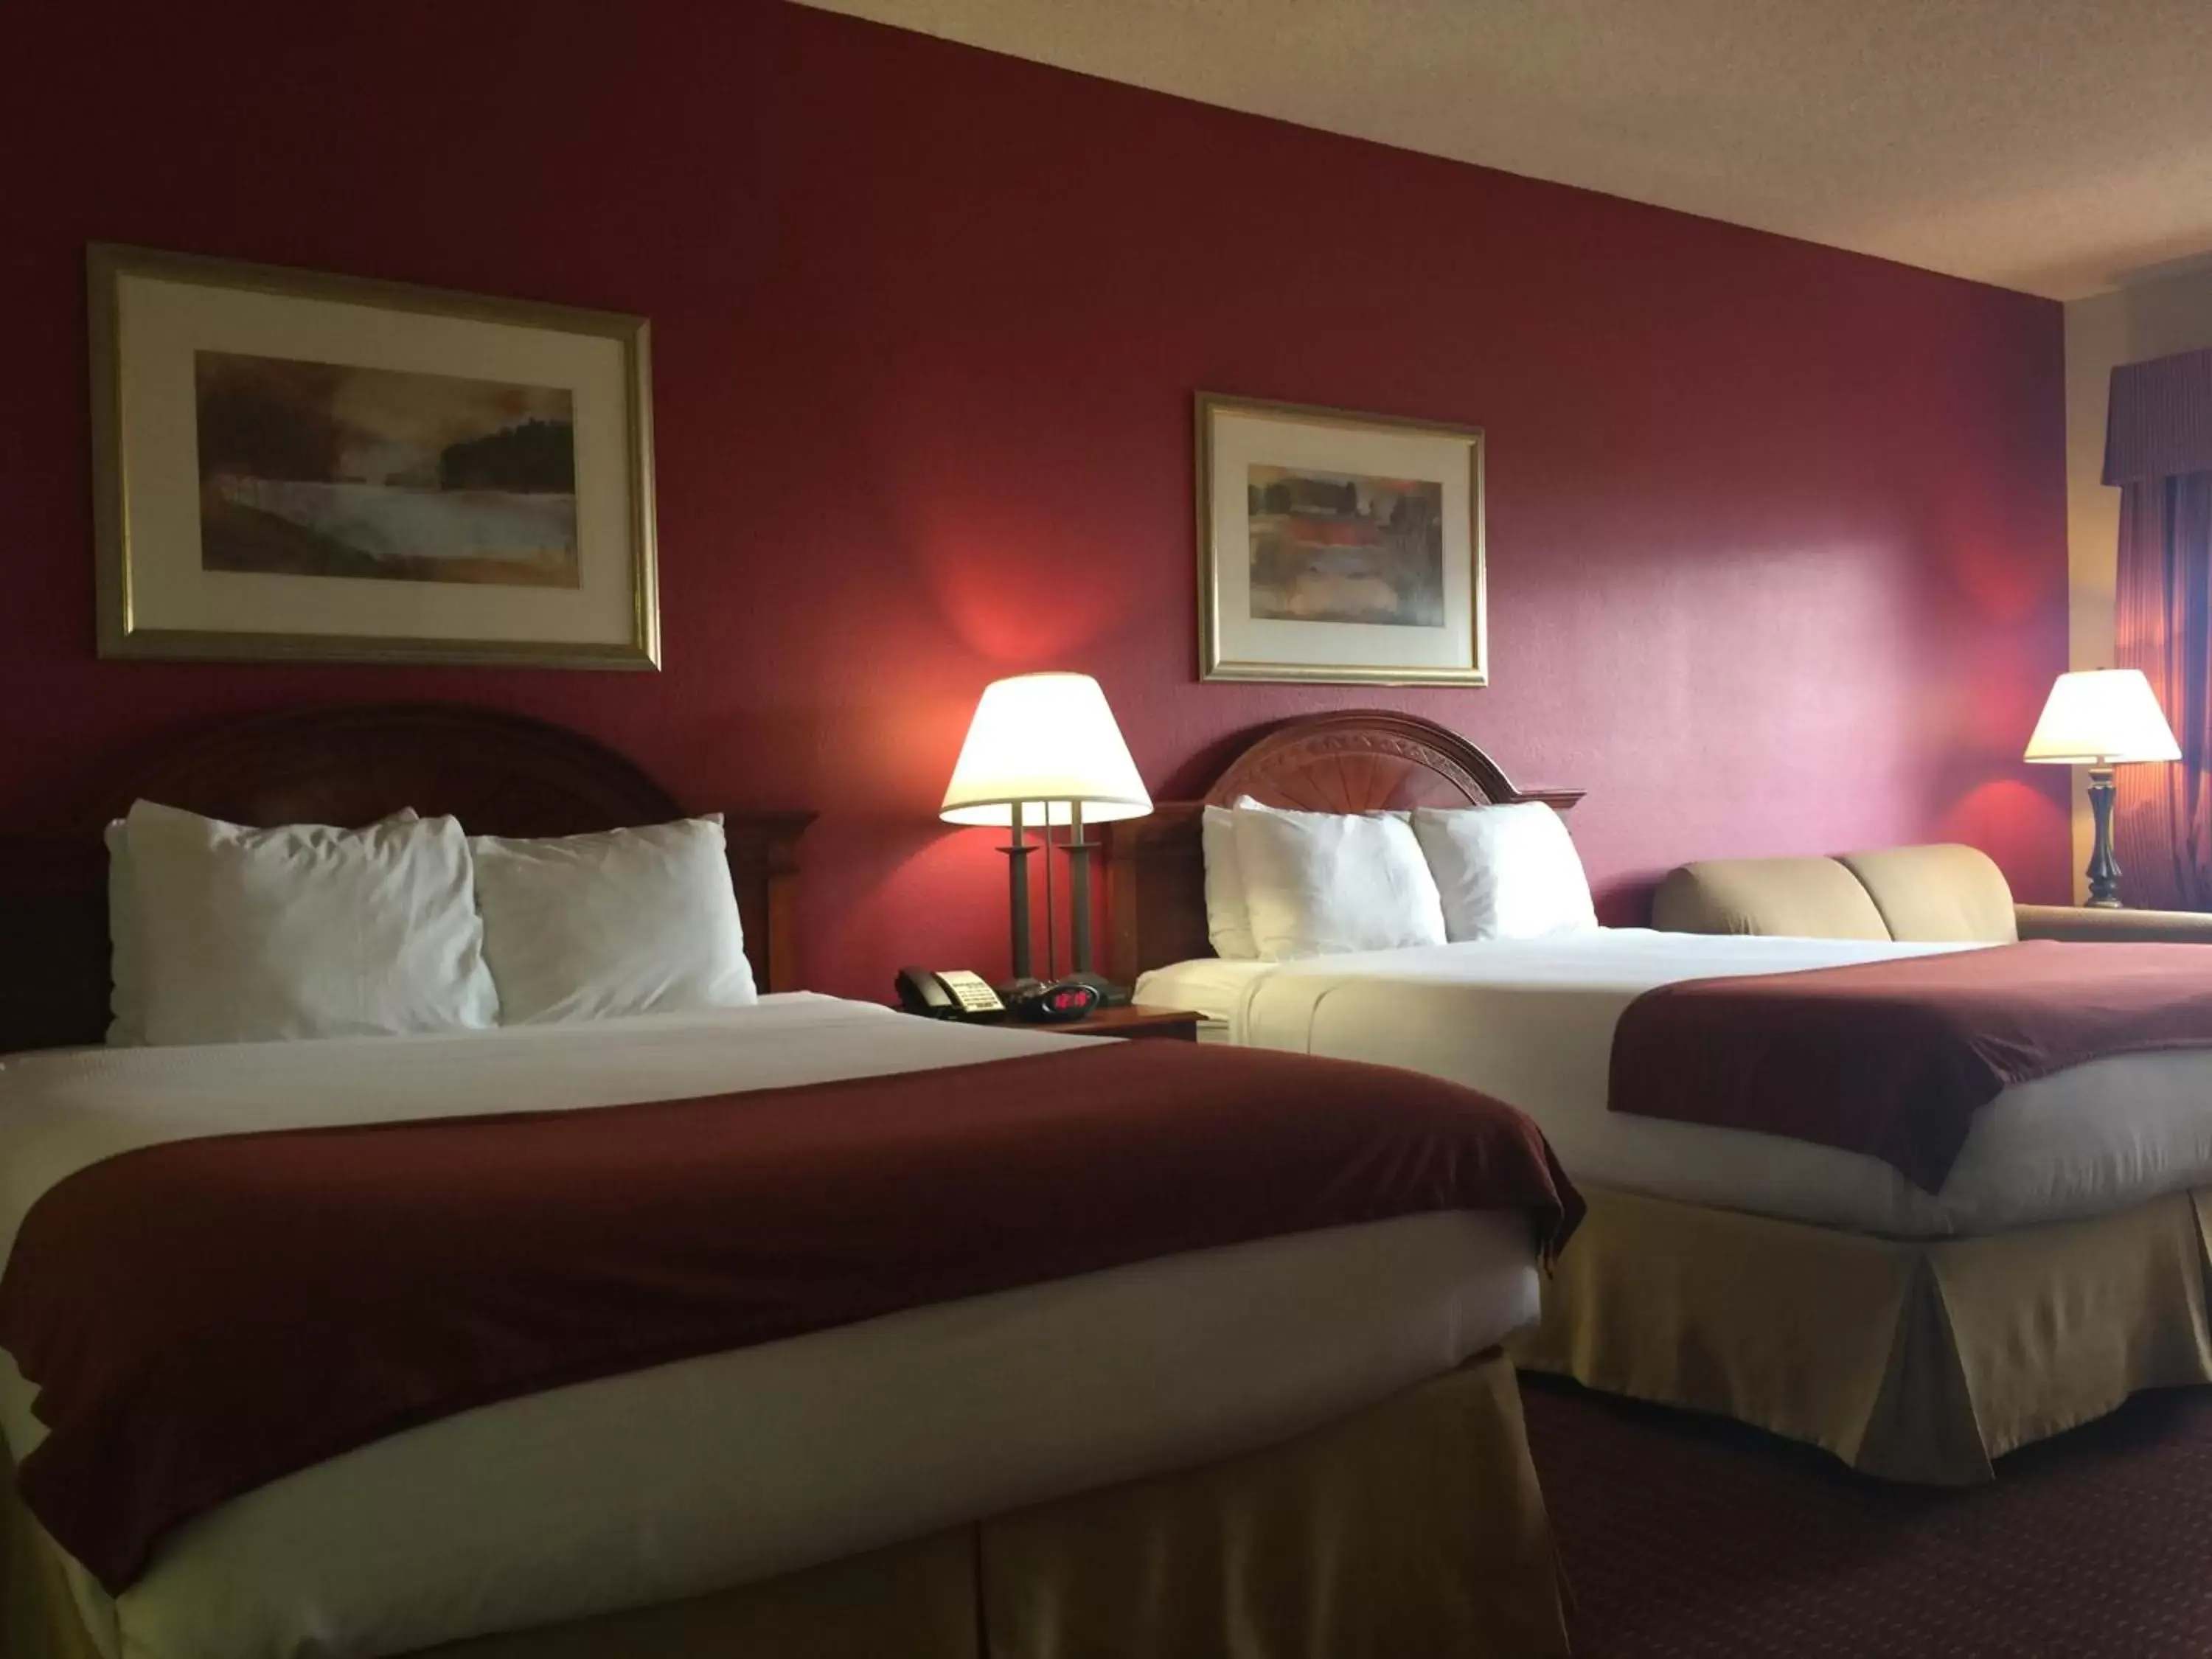 Pets, Room Photo in Baymont Inn & Suites by Wyndham Holbrook